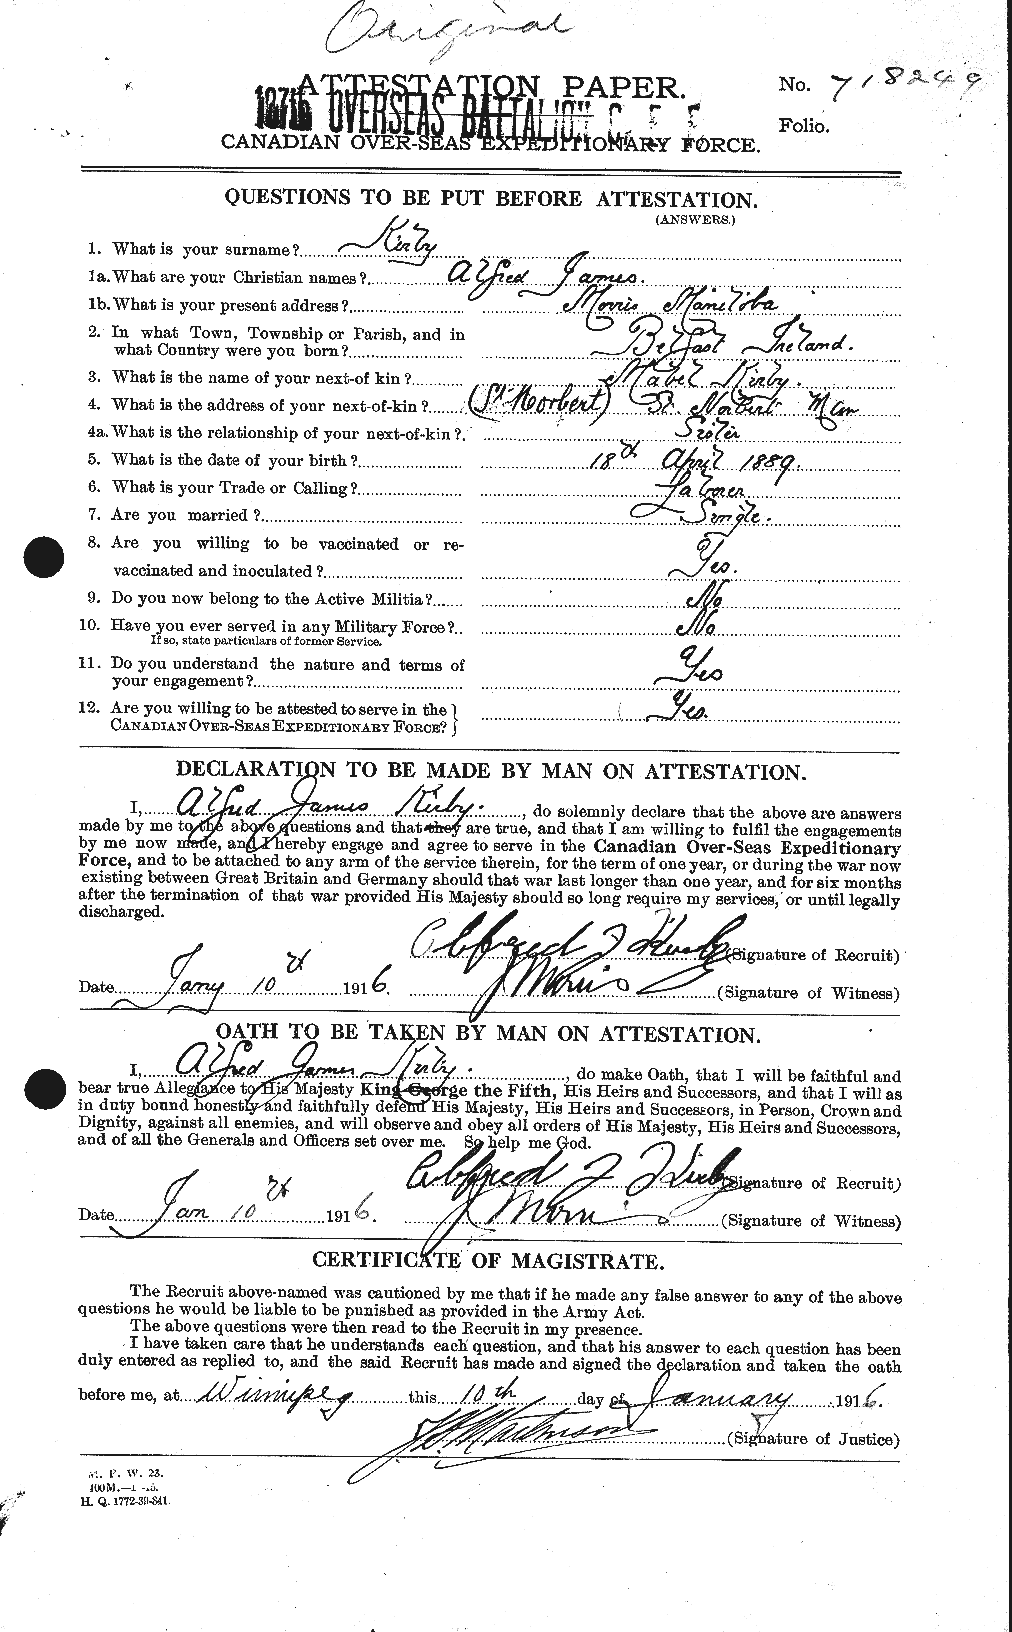 Personnel Records of the First World War - CEF 437150a